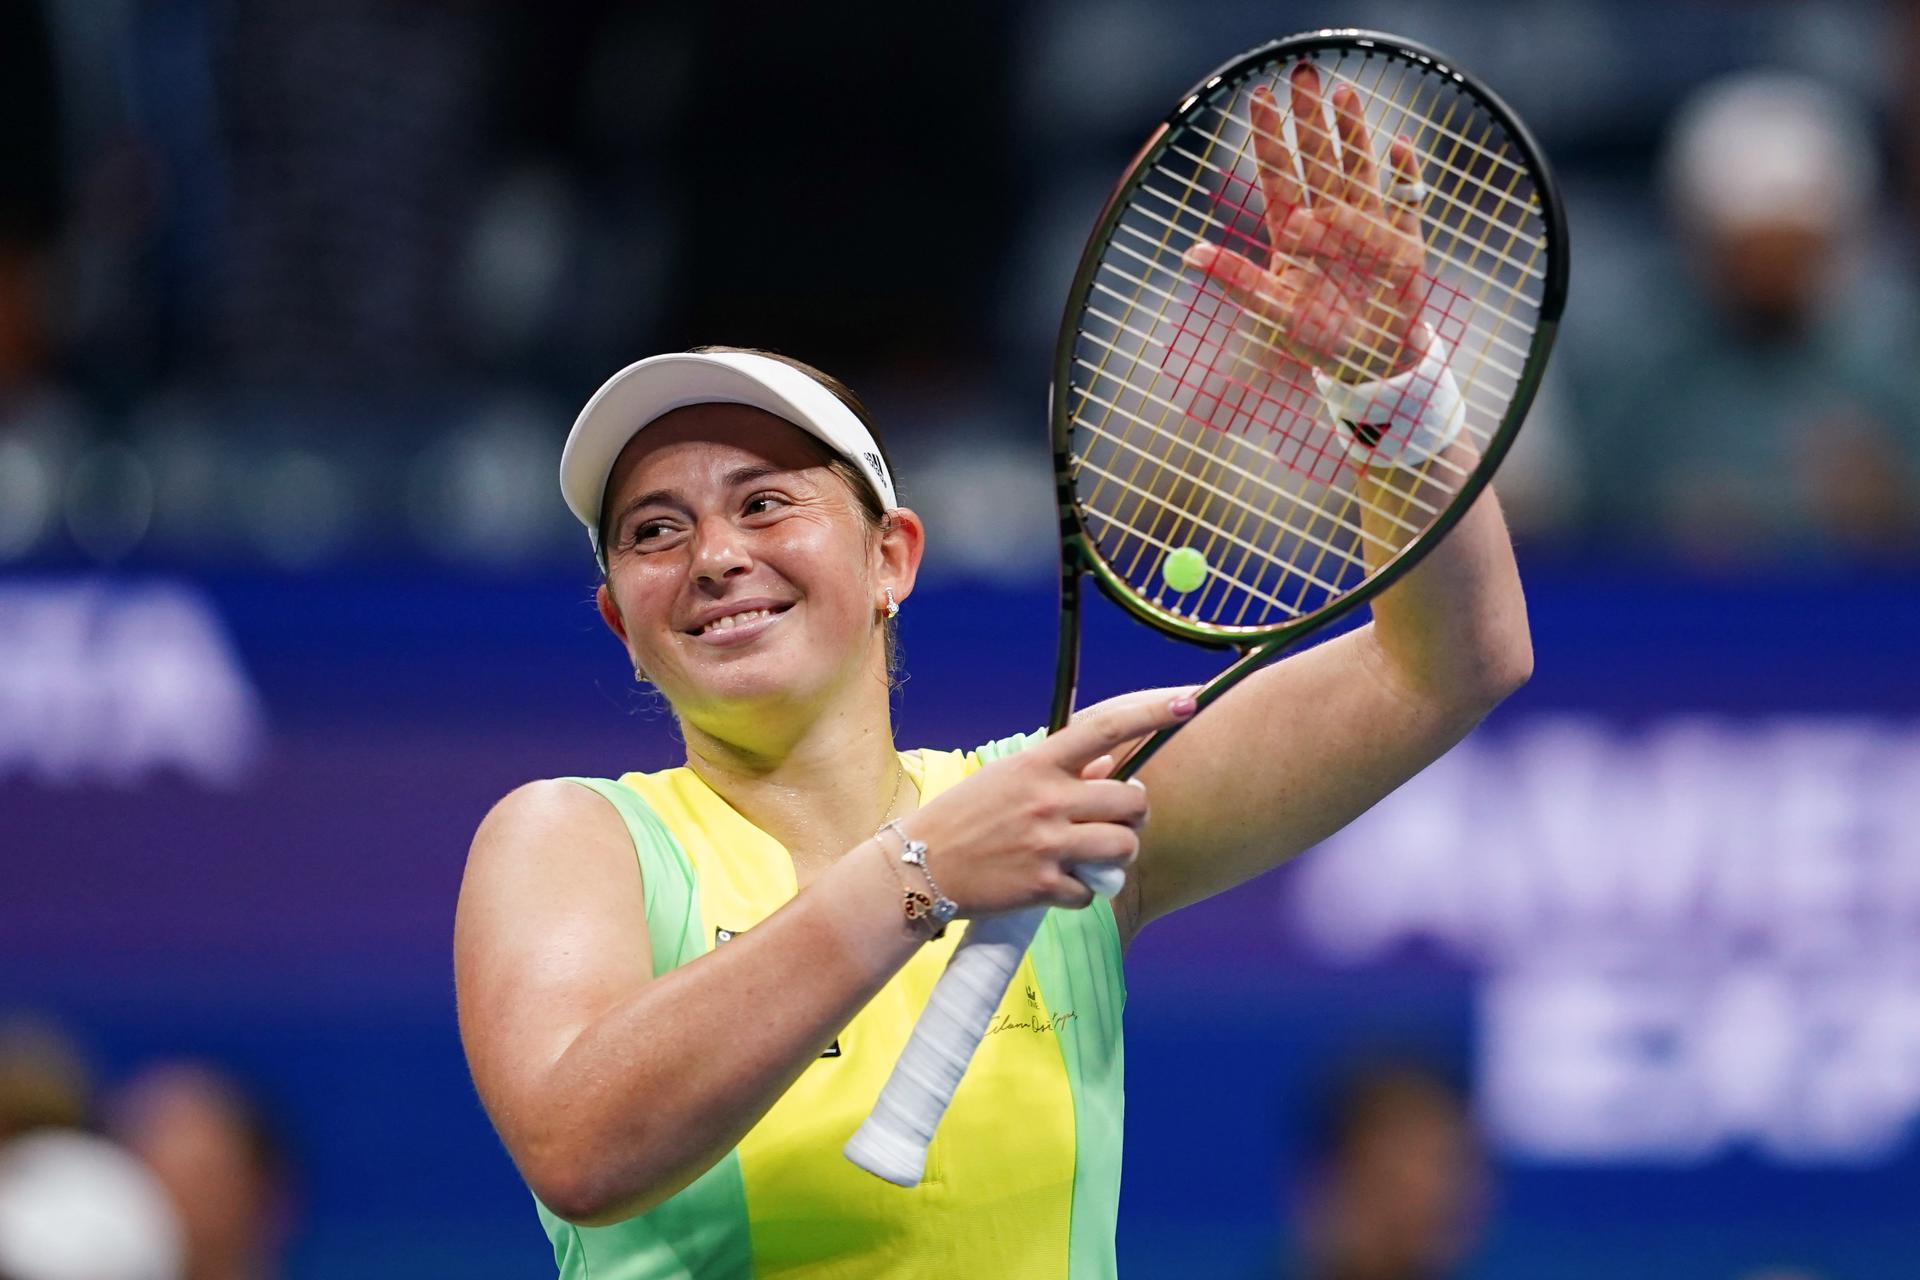 Jelena Ostapenko of Latvia celebrates after winning her fourth round match against Iga Swiatek of Poland at the US Open Tennis Championships at the USTA National Tennis Center in Flushing Meadows, New York, USA, 03 September 2023. EFE-EPA/WILL OLIVER
